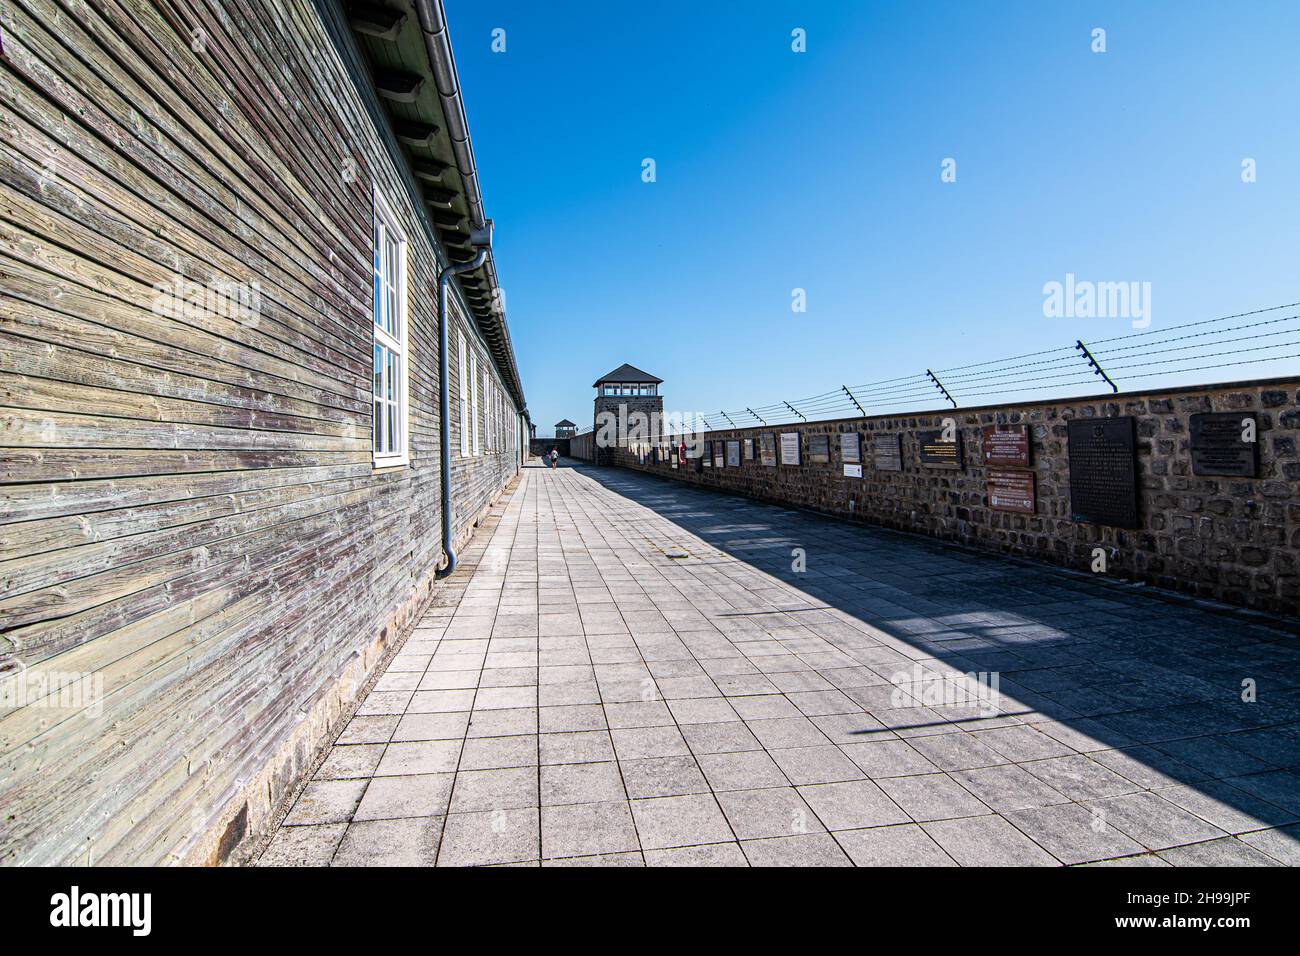 Mauthausen concentration camp barracks and walls from the inside Stock Photo